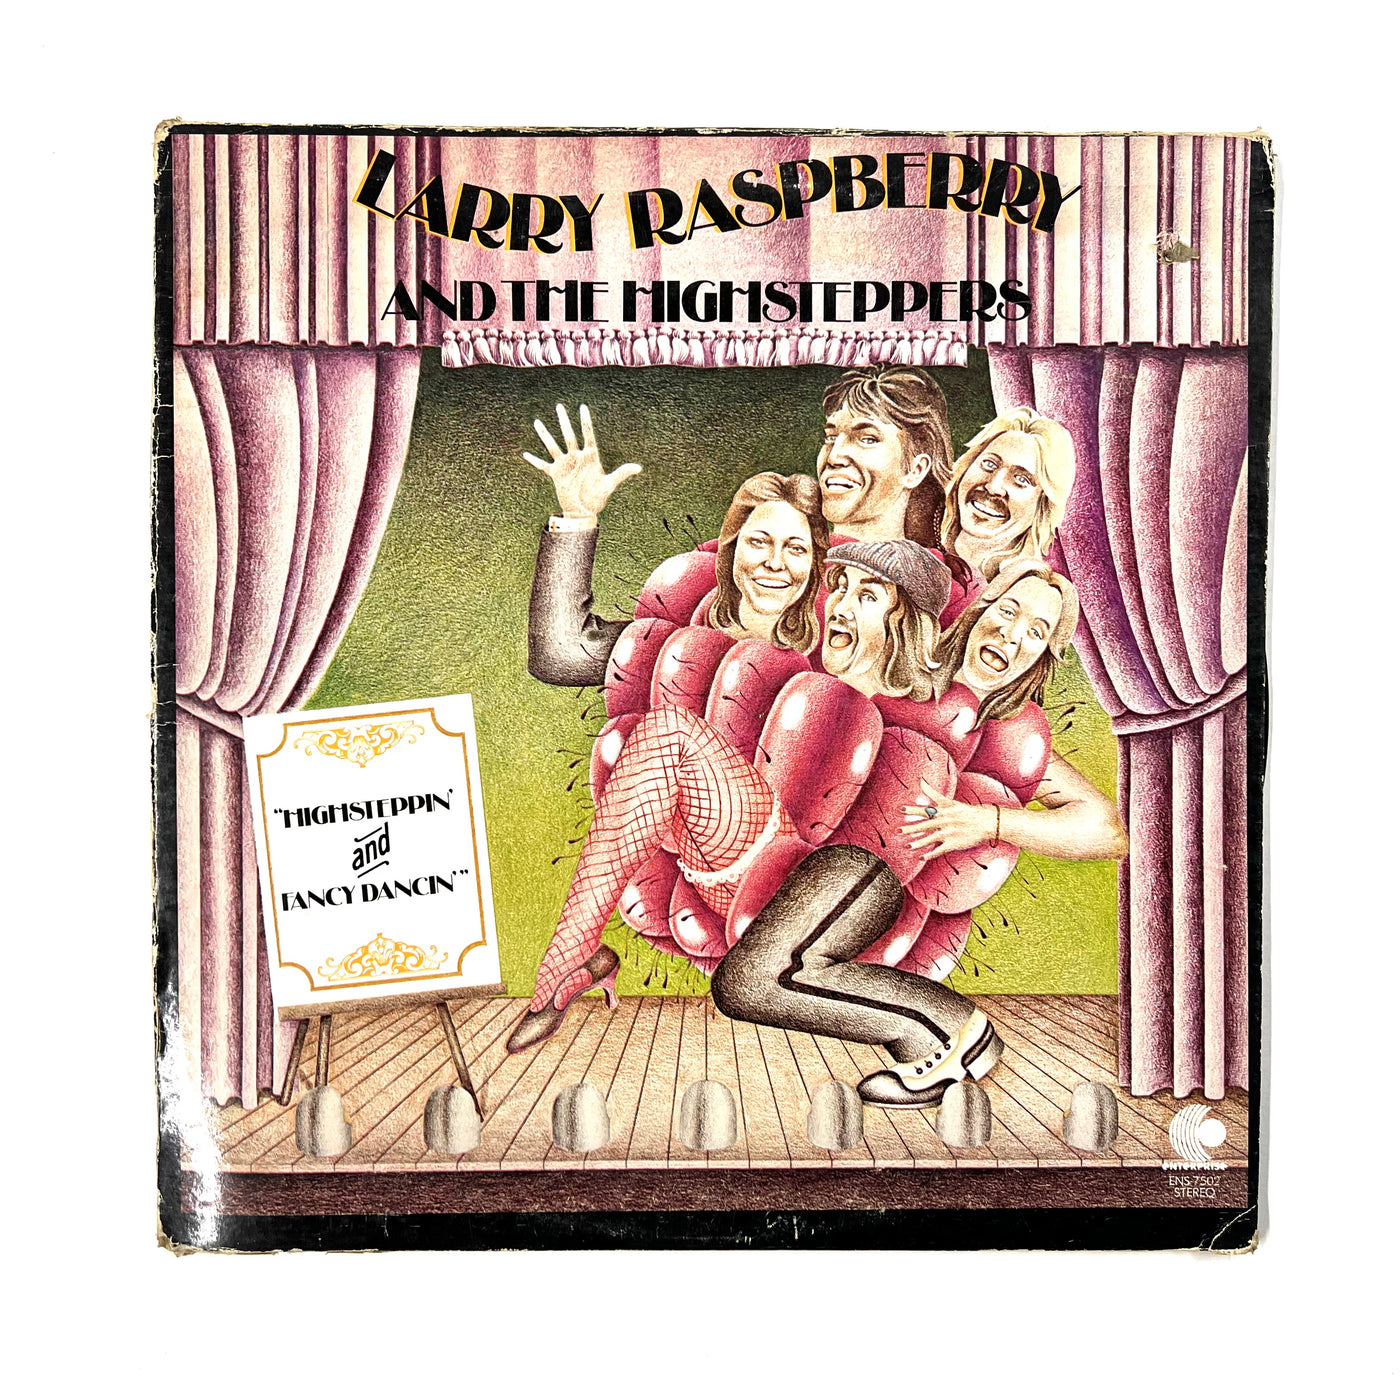 Larry Raspberry And The Highsteppers - Highsteppin' And Fancy Dancin'